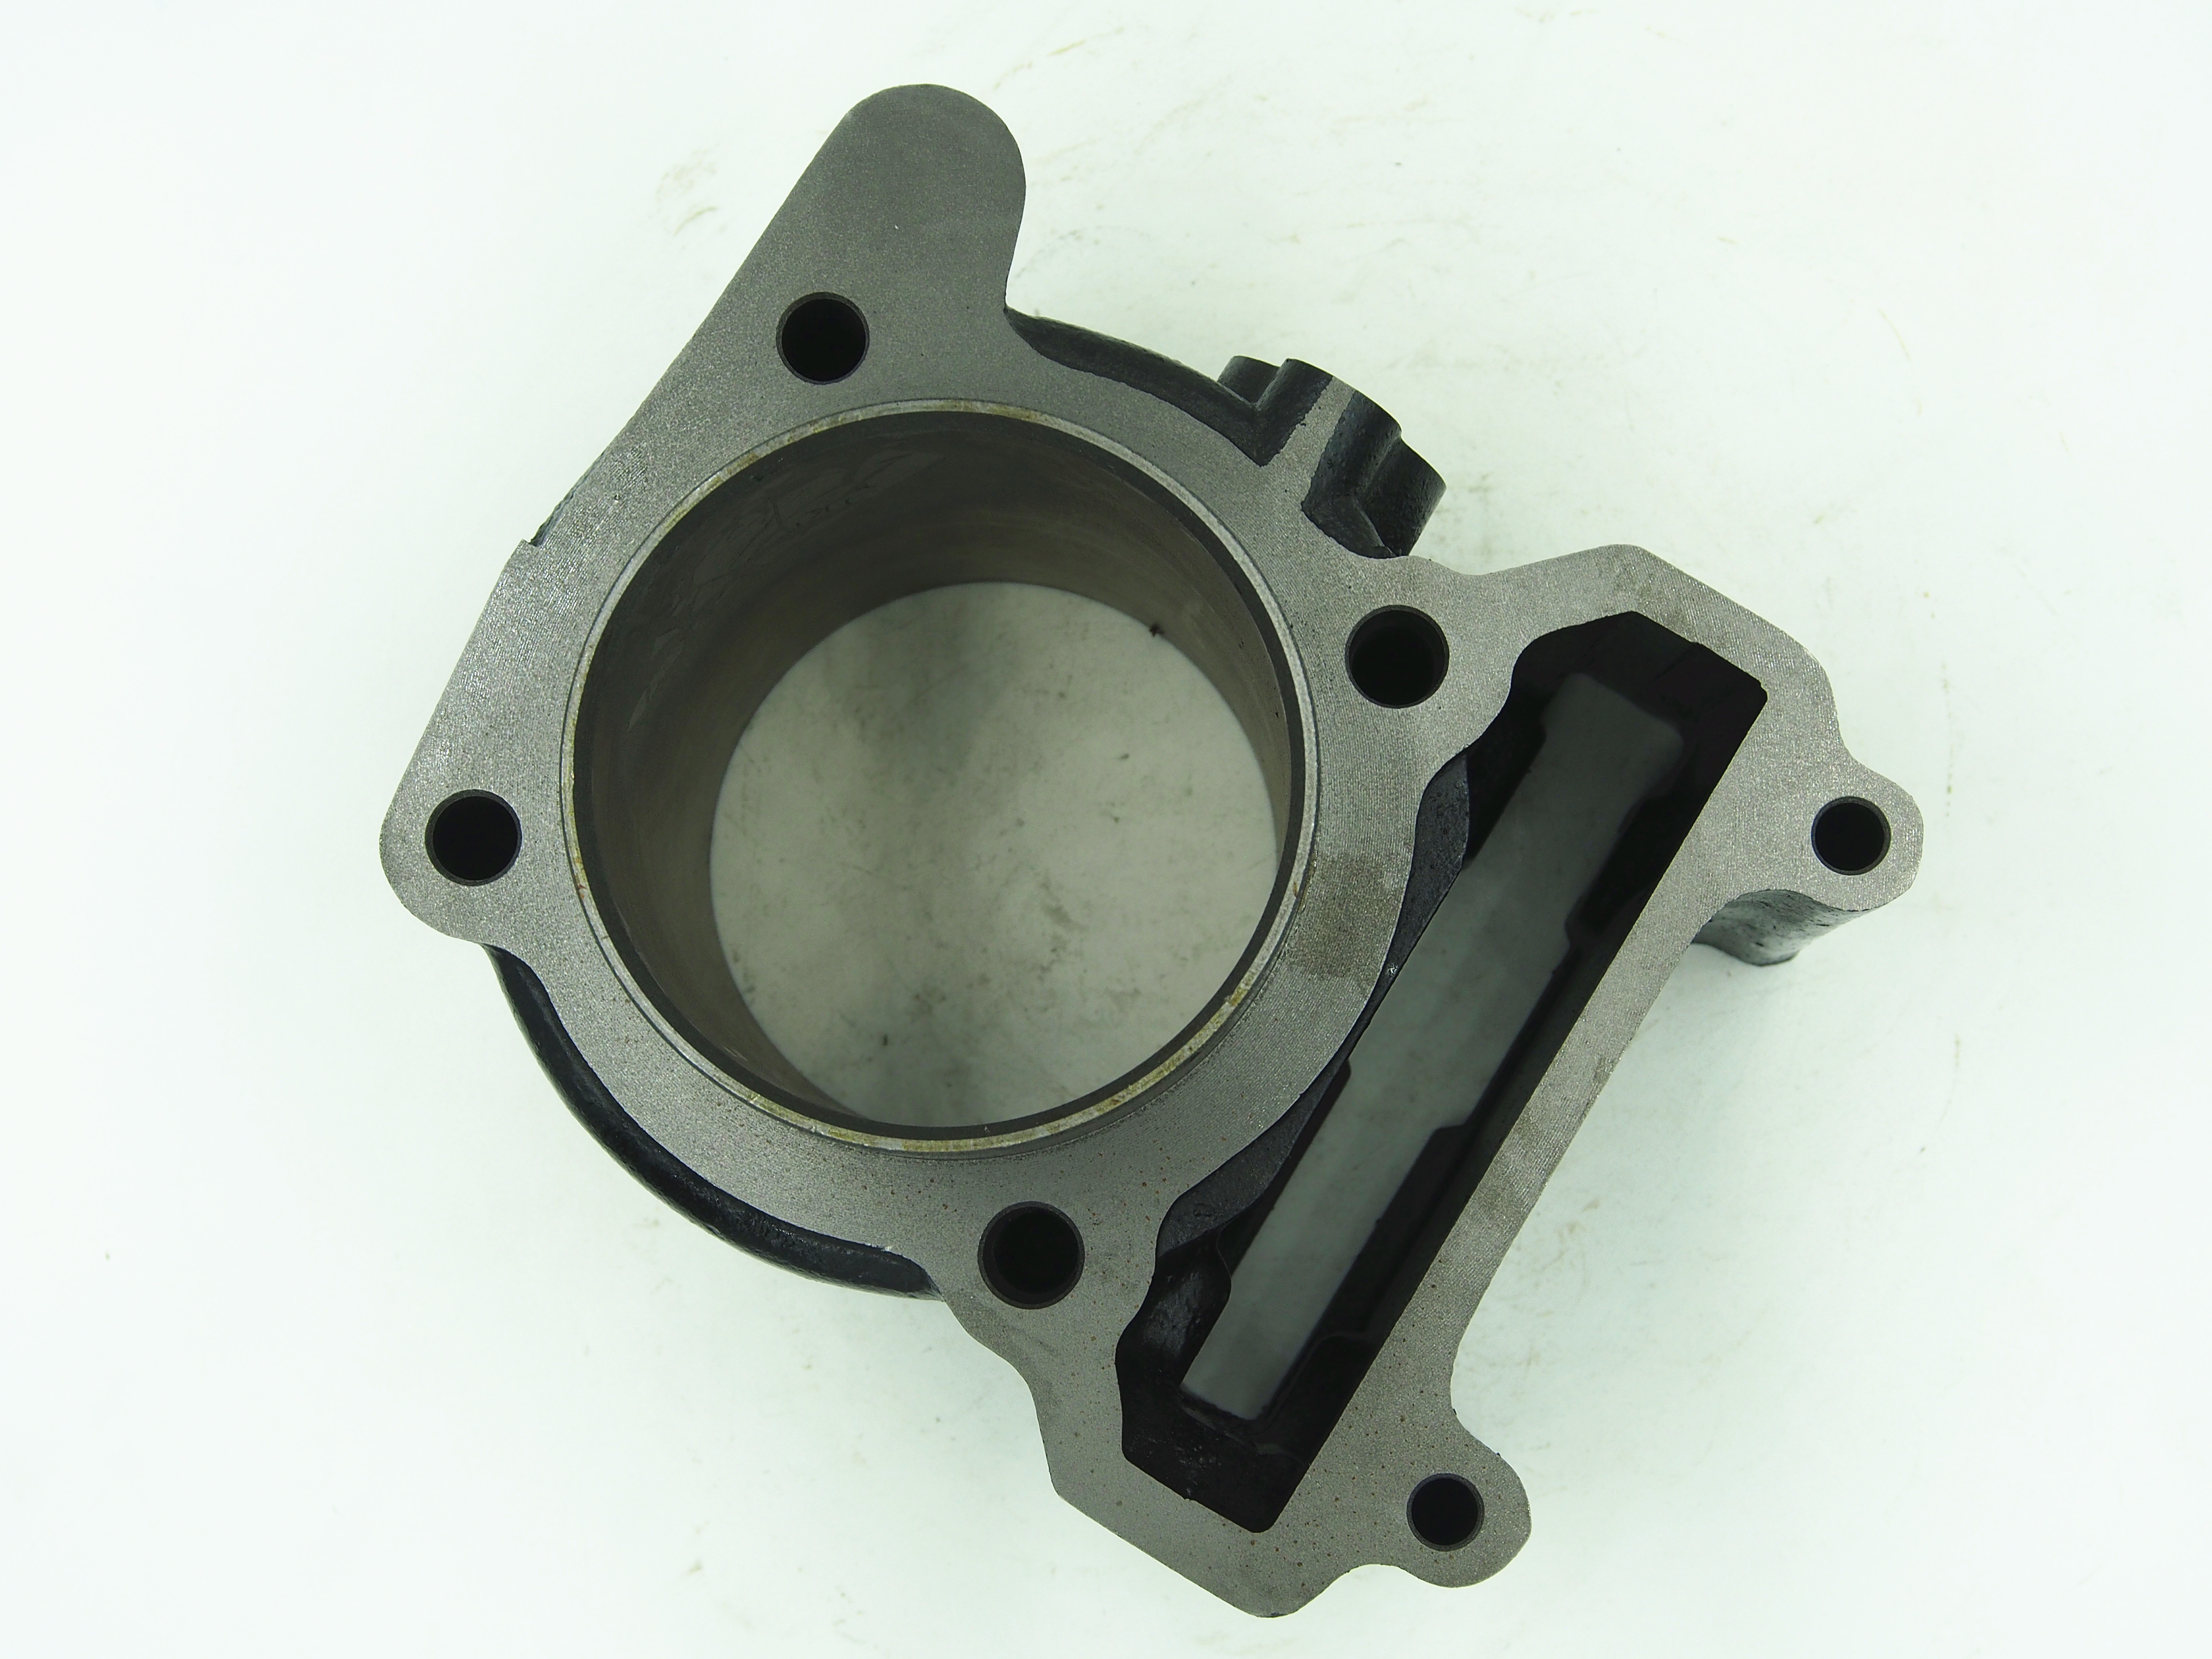 Water Cooled Atv Cylinder Block Four Stroke For Chunfeng250 , Atv Engine Parts